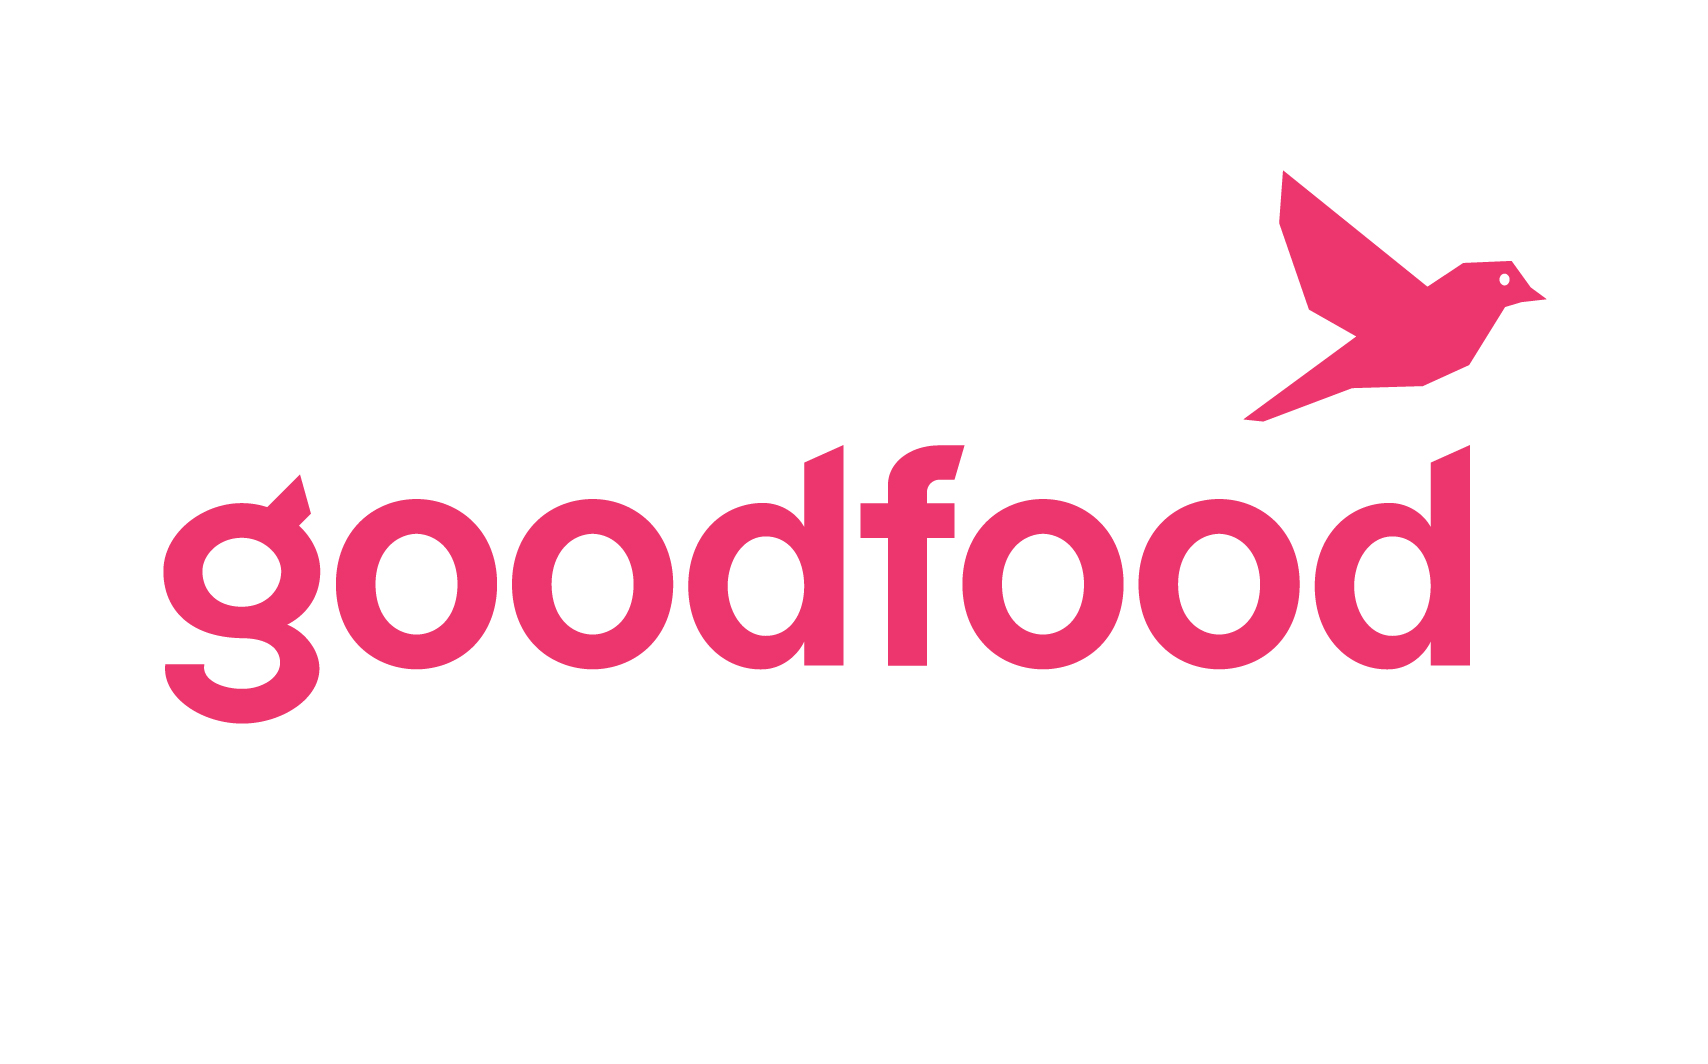 Goodfood donates one million meals to Breakfast Club of Canada with help from NHL All-Star, Nick Suzuki